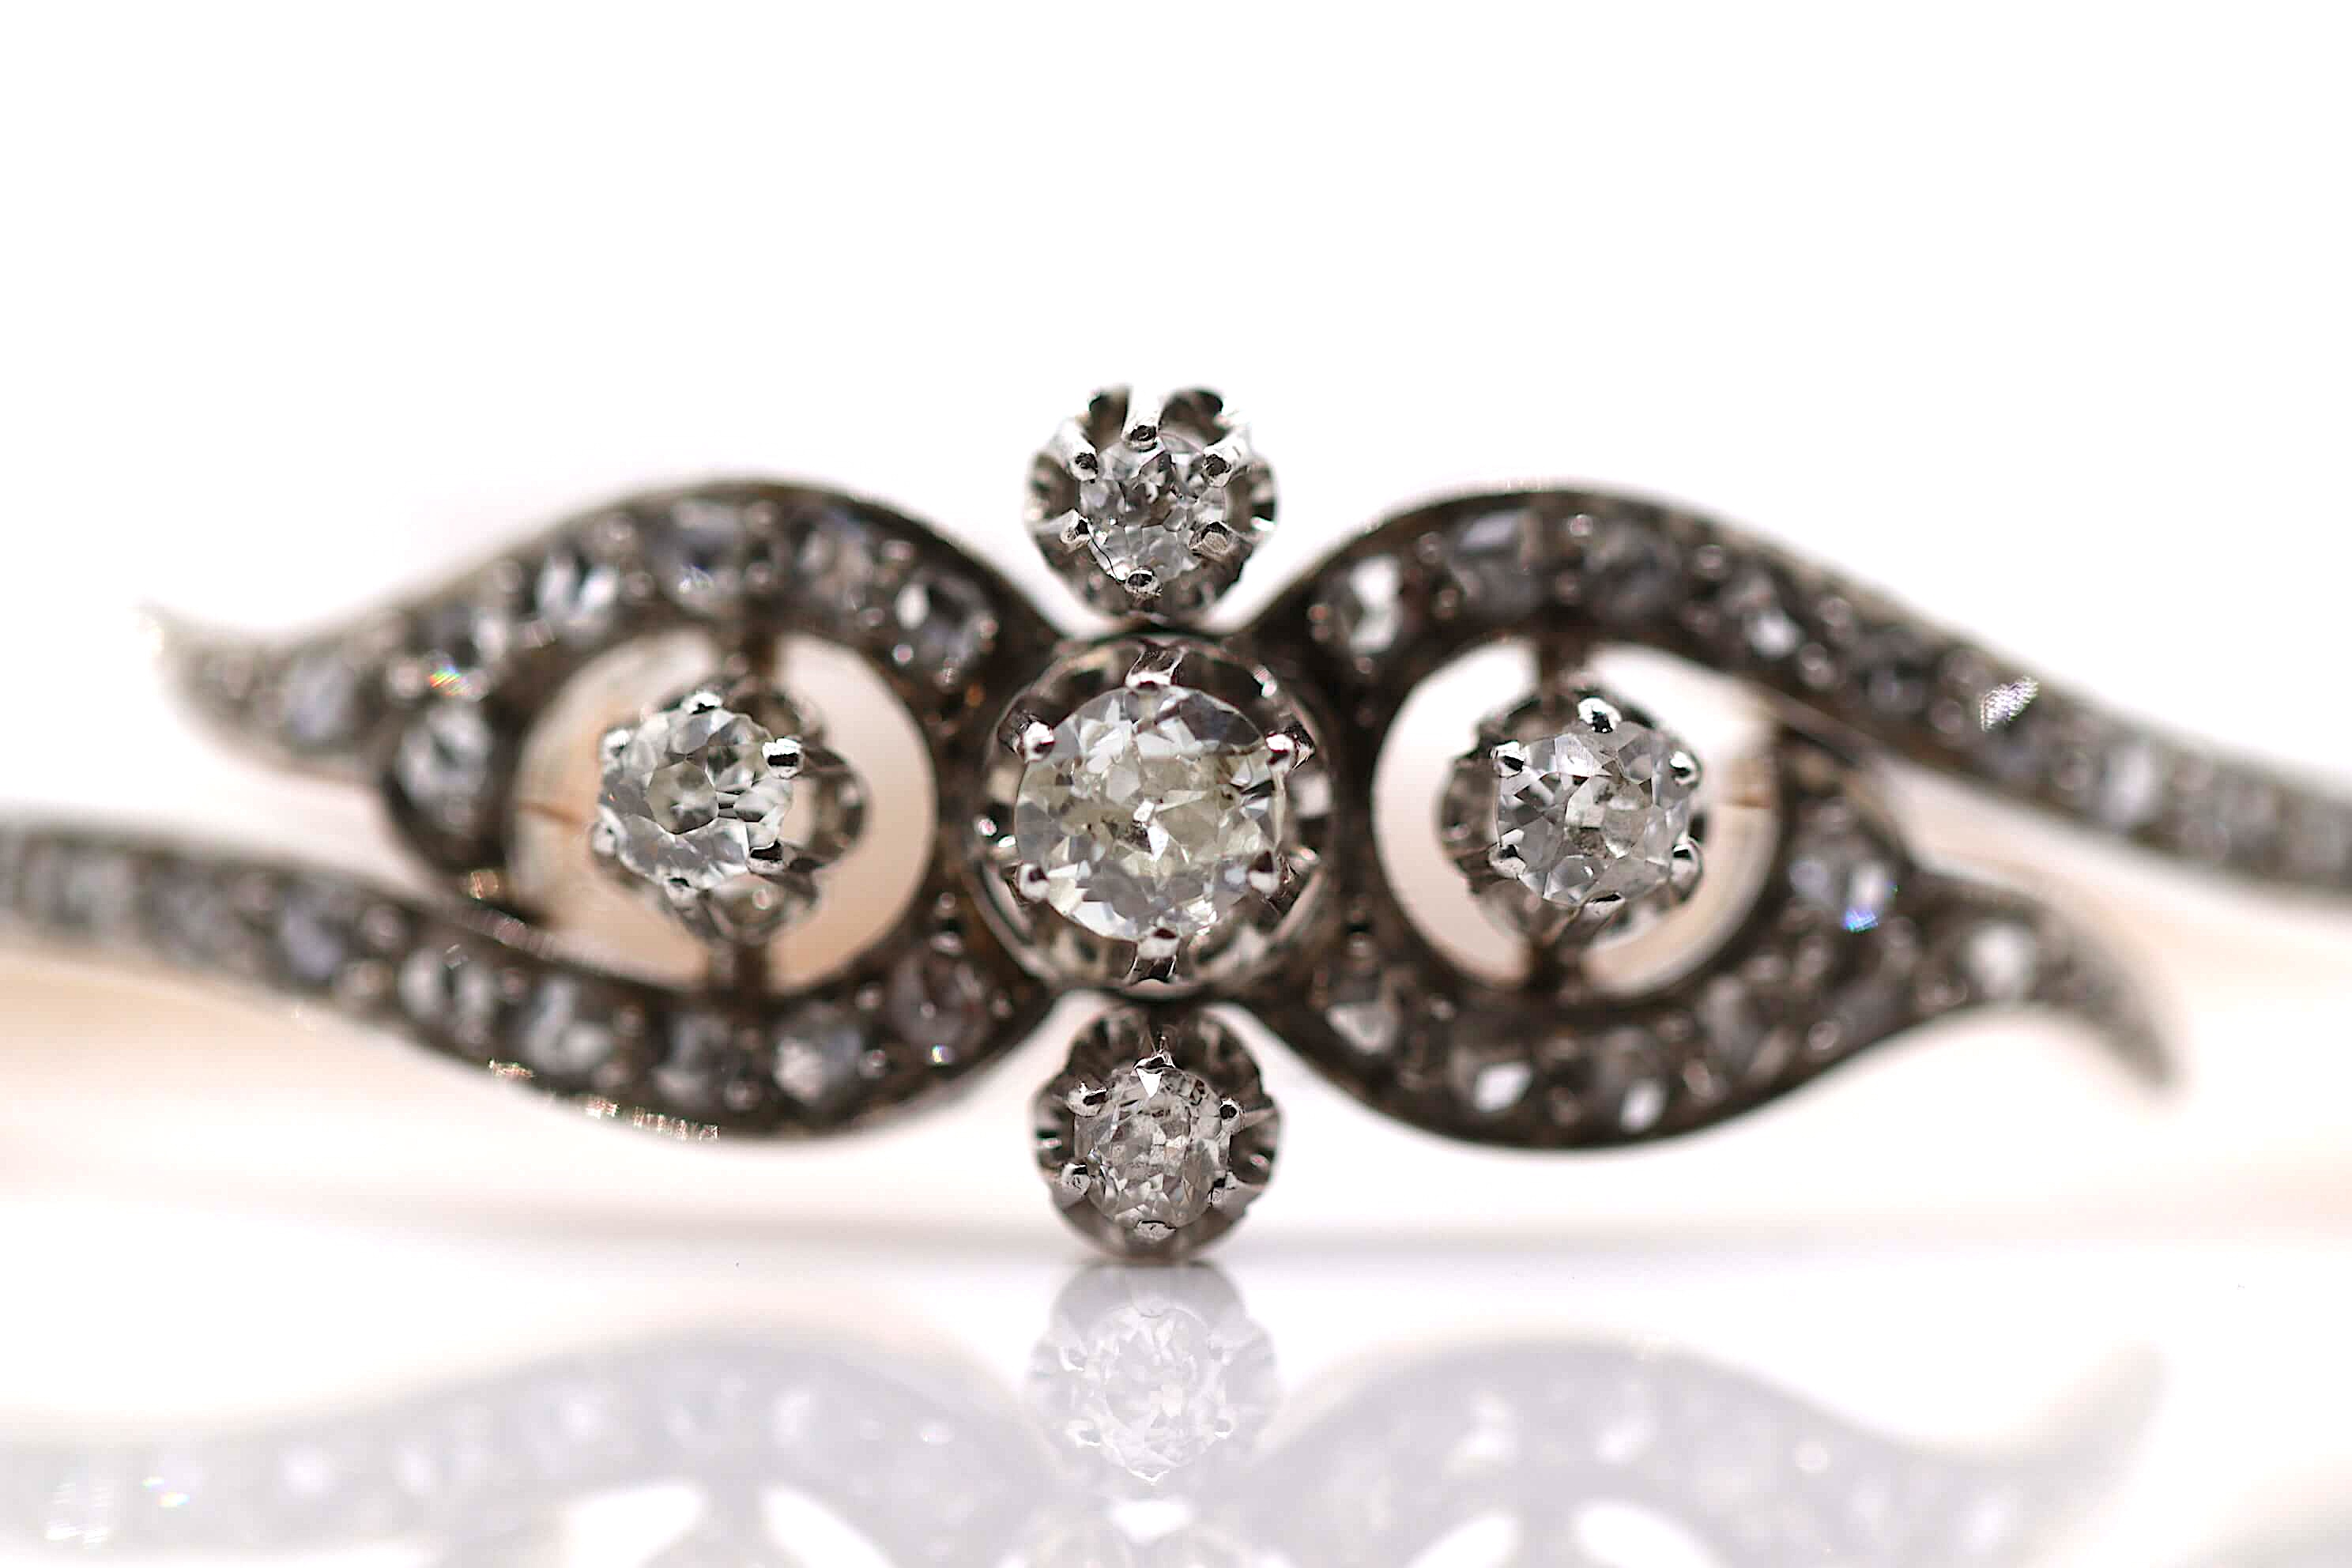 SOLD A 19th Century French Diamond Bangle